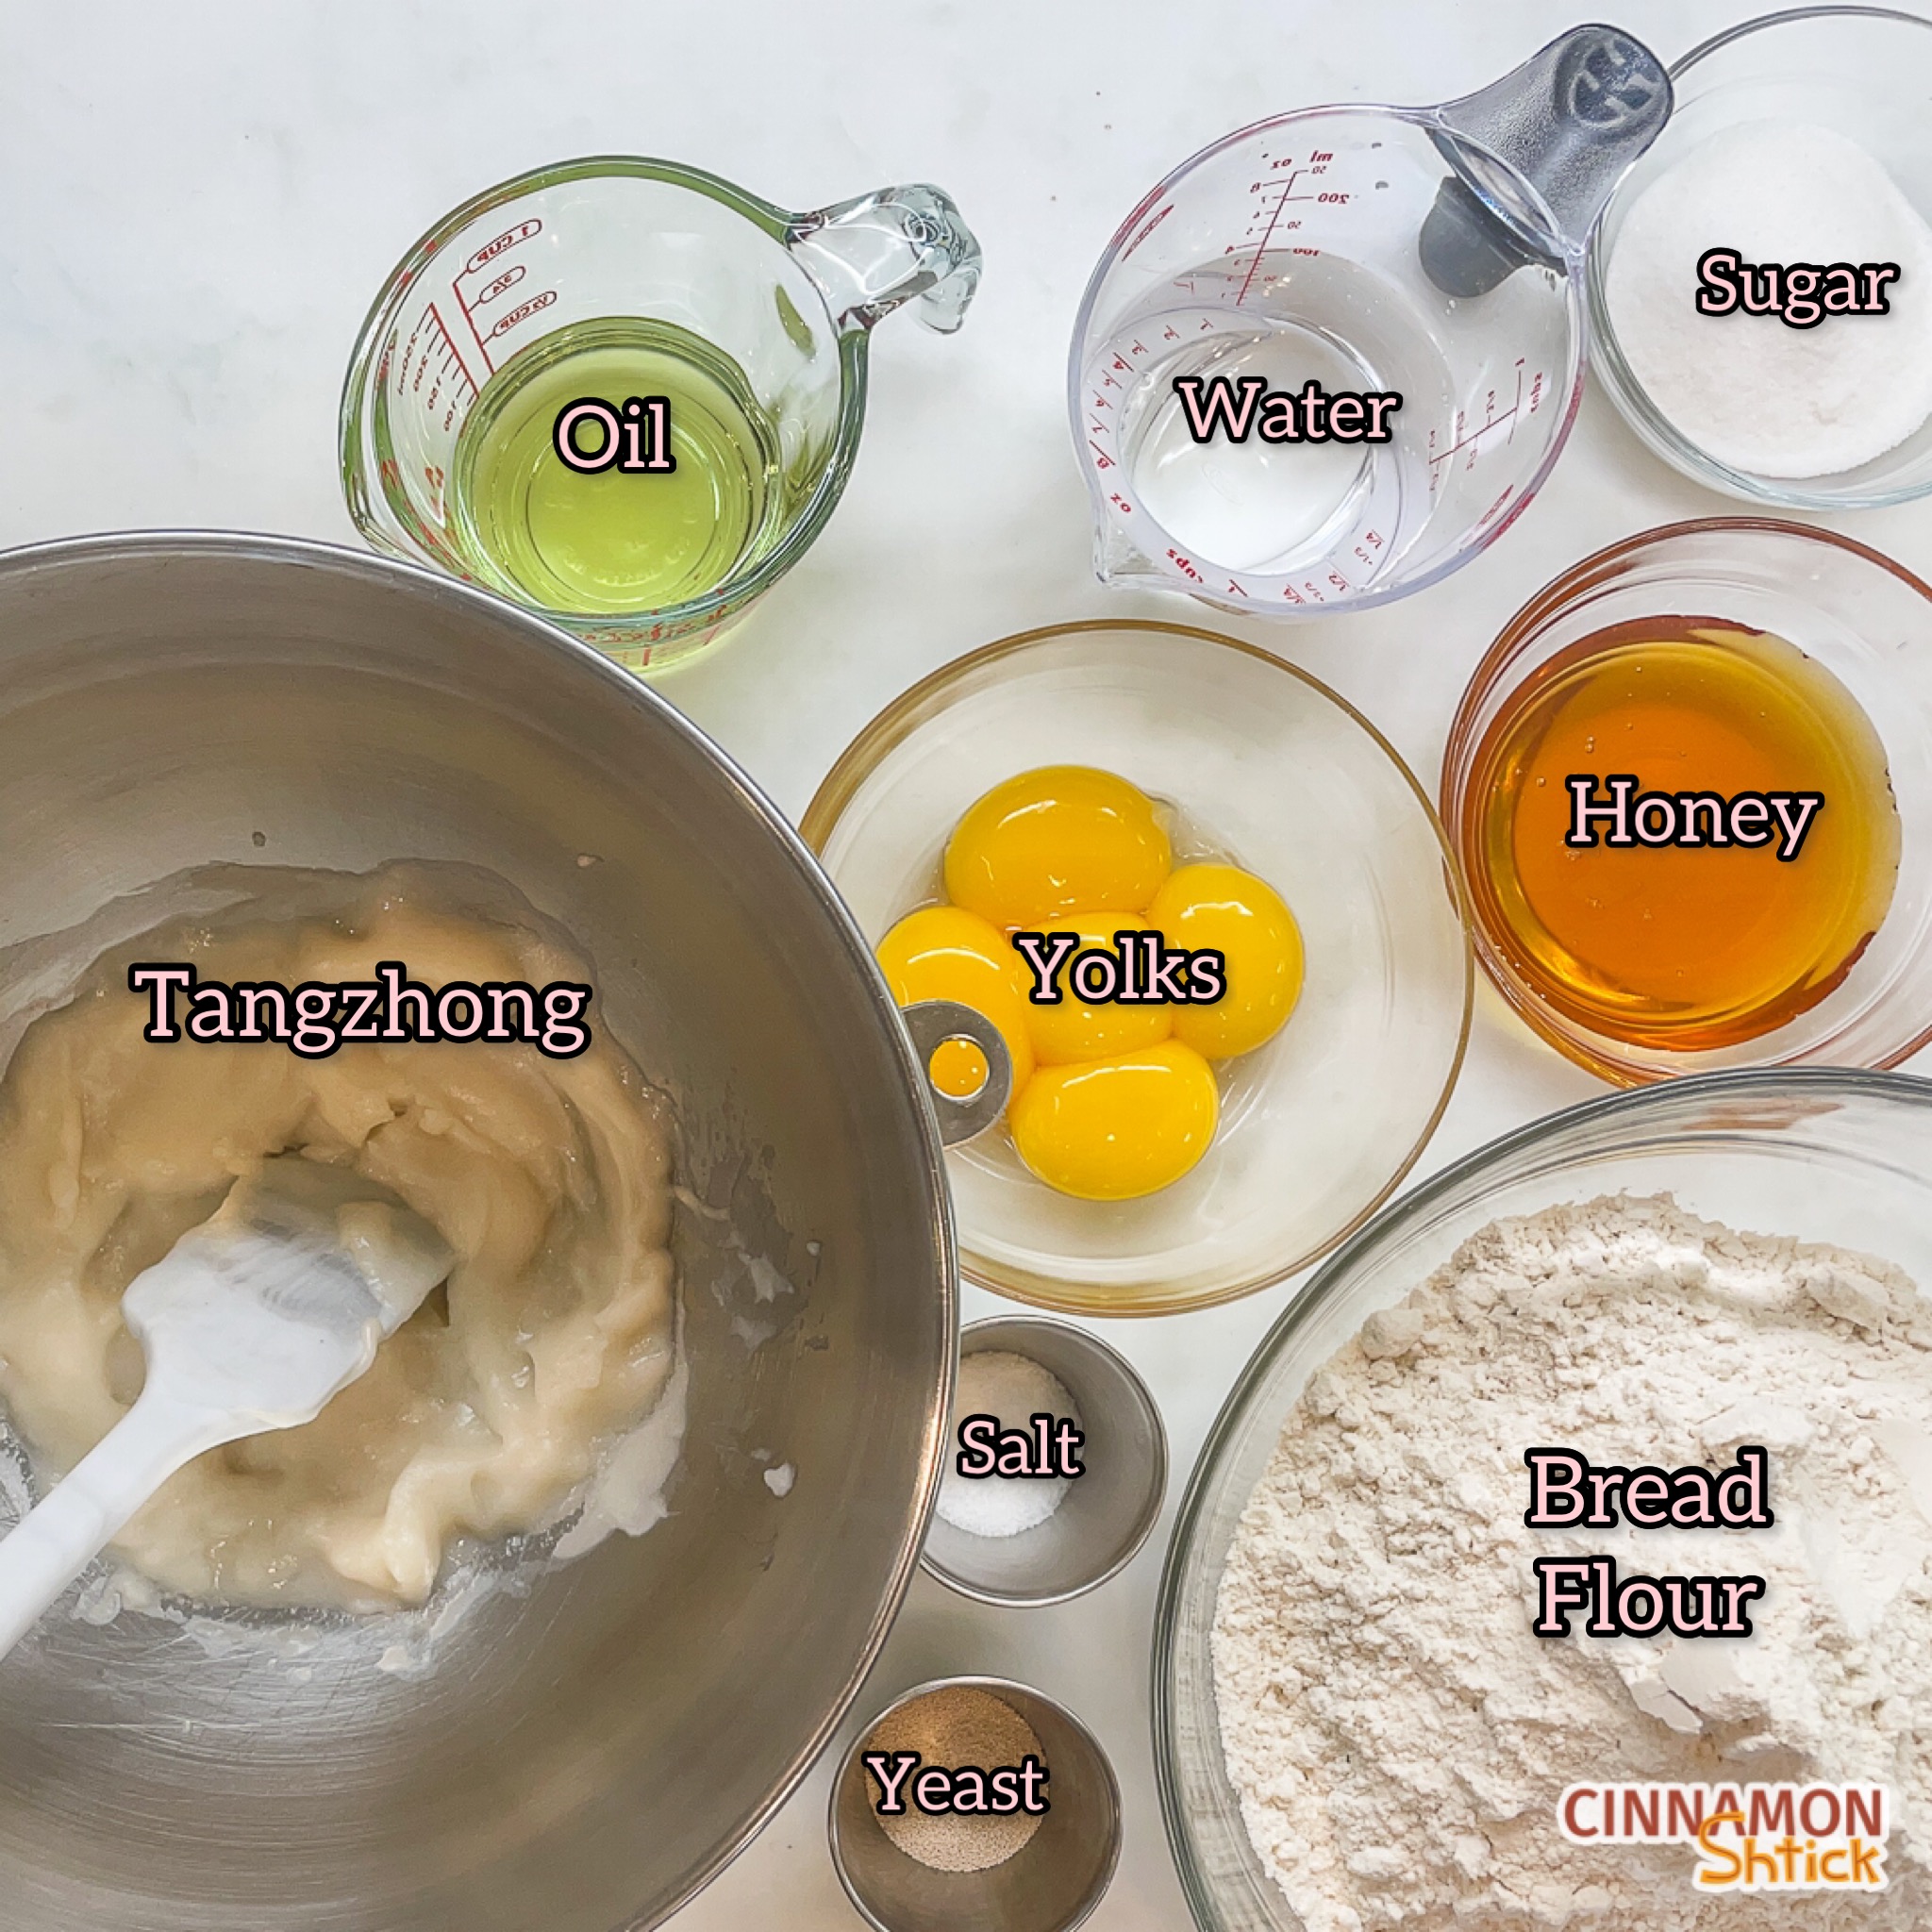 tangzhong in mixing bowl together with cups and bowls holding the rest of the challah ingredients, with each labeled as oil, water, sugar, honey, yolks, bread flour, salt and yeast